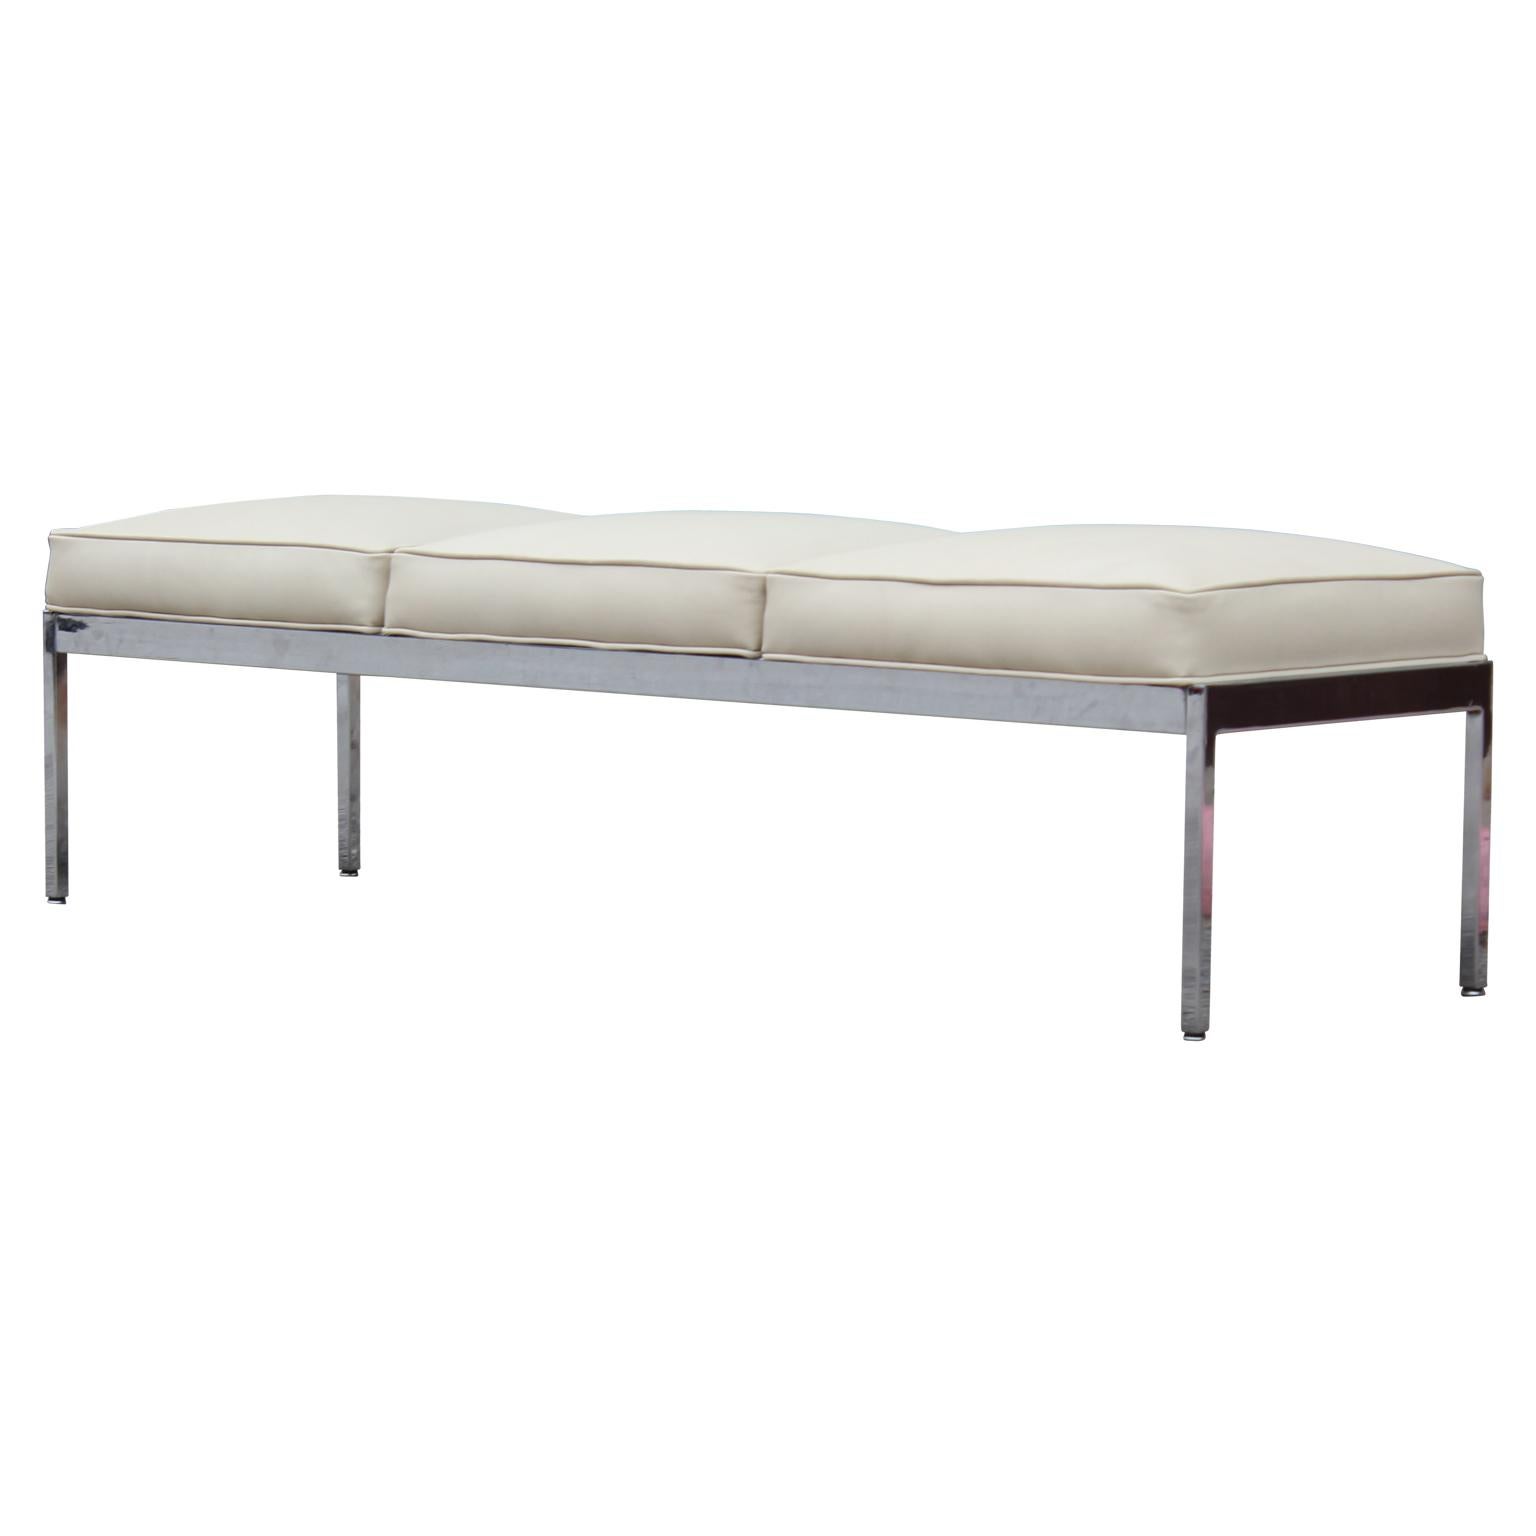 American Mid-Century Modern off White Leather Knoll Style Chrome Bench